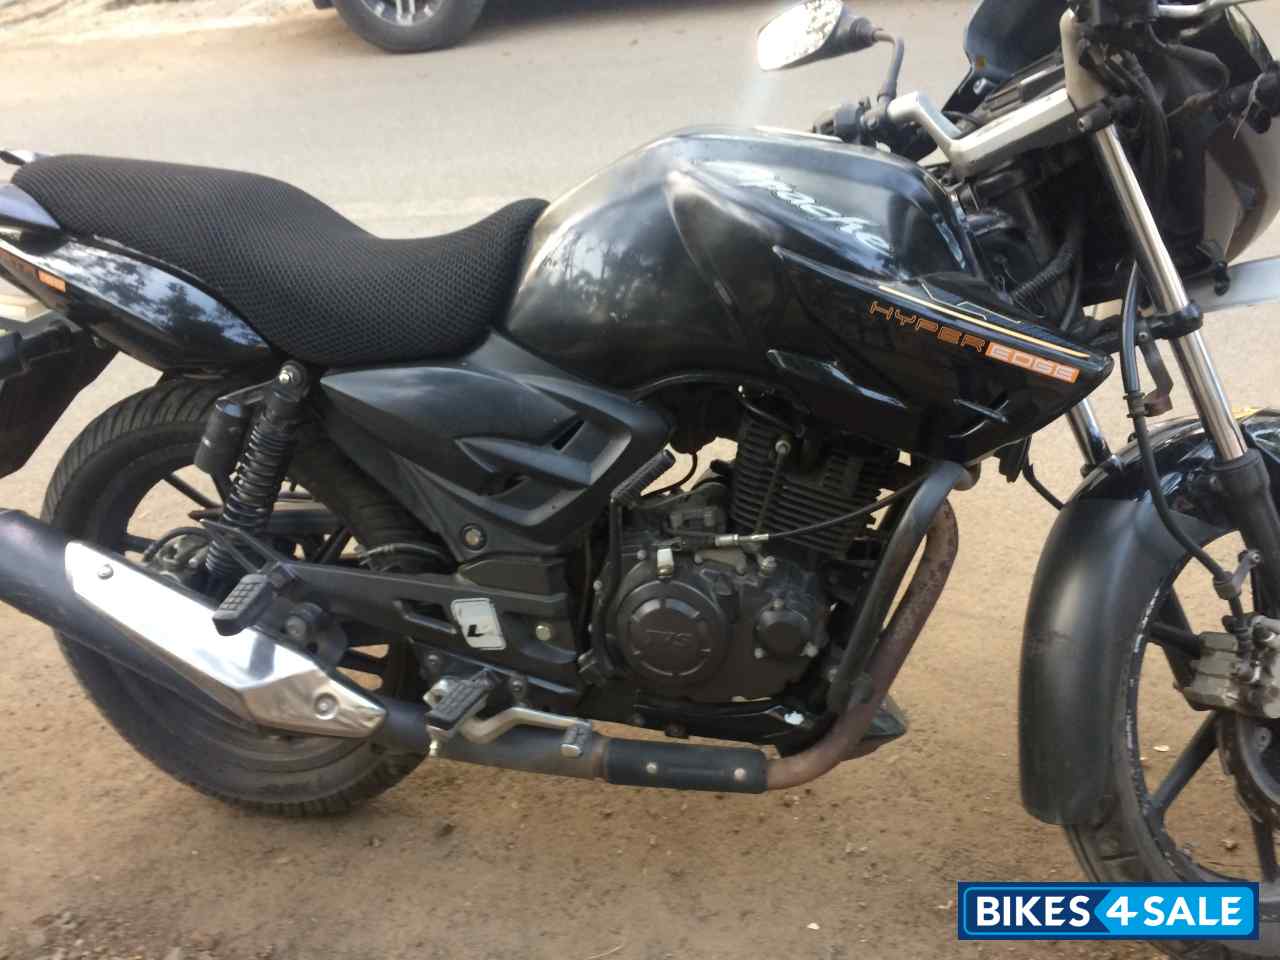 Used 11 Model Tvs Apache Rtr 160 For Sale In Pune Id Black Colour Bikes4sale